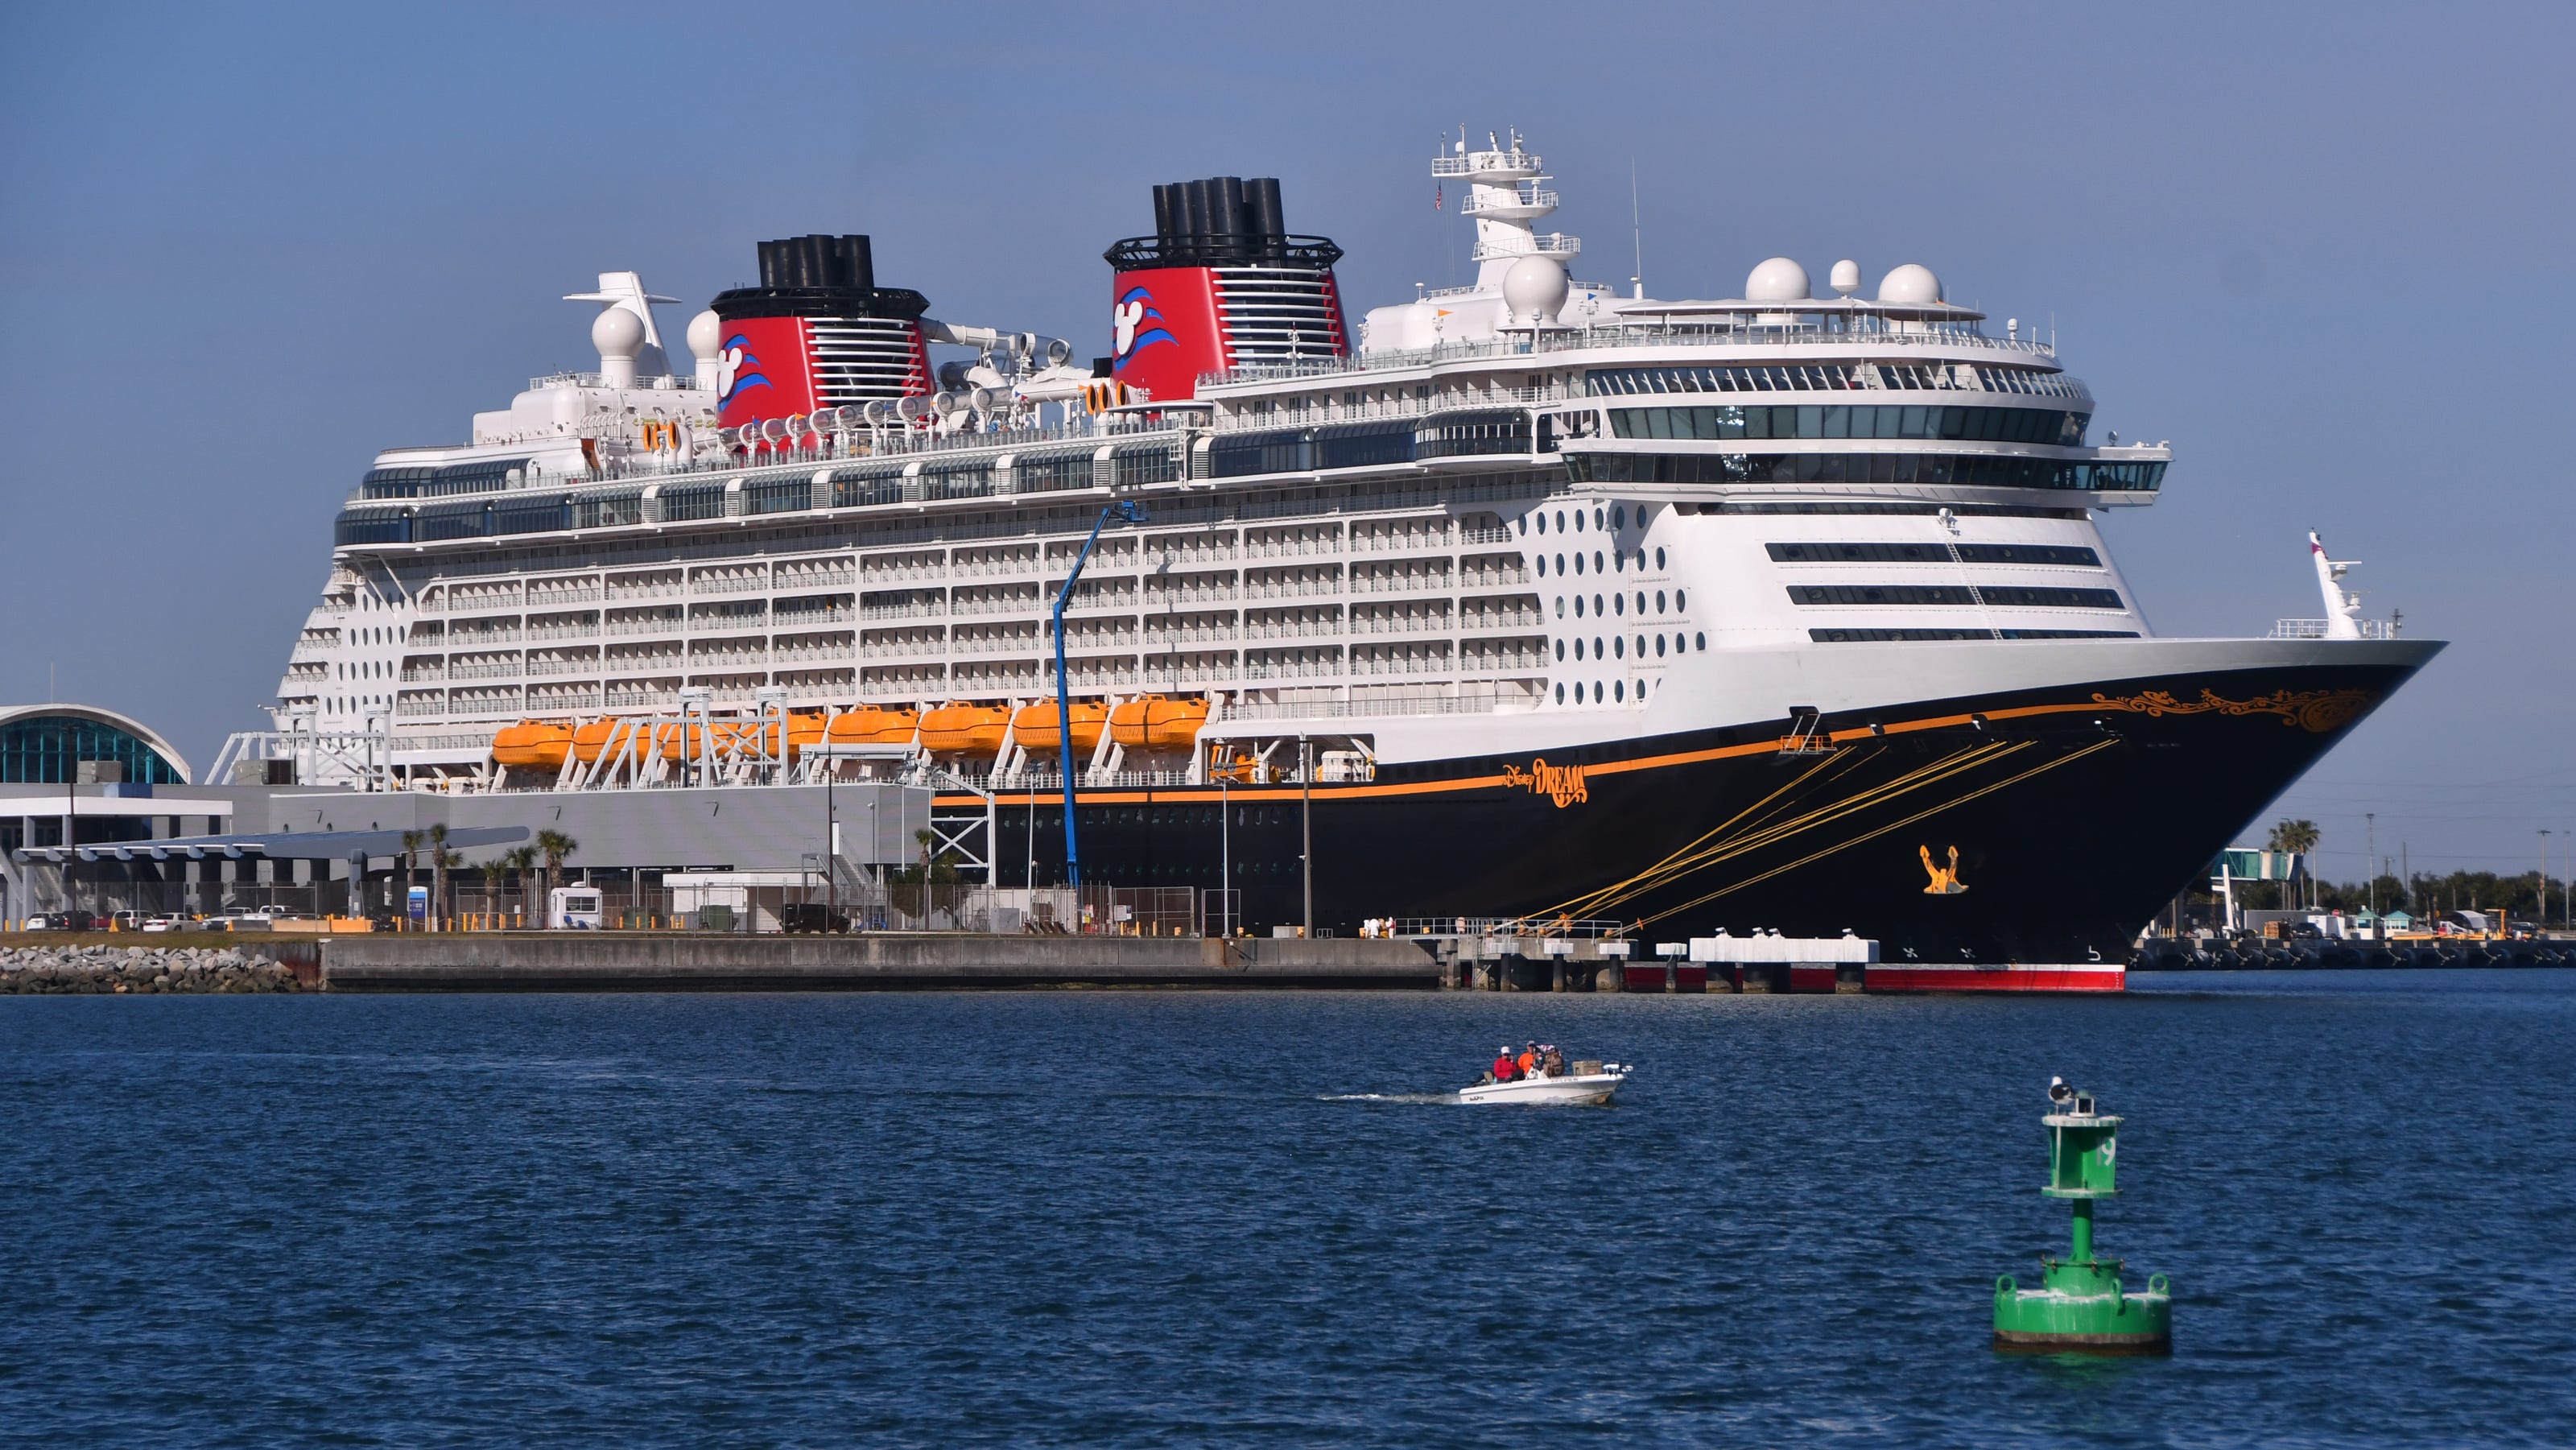 Disney plans 'test cruise' out of Port Canaveral starting June 29